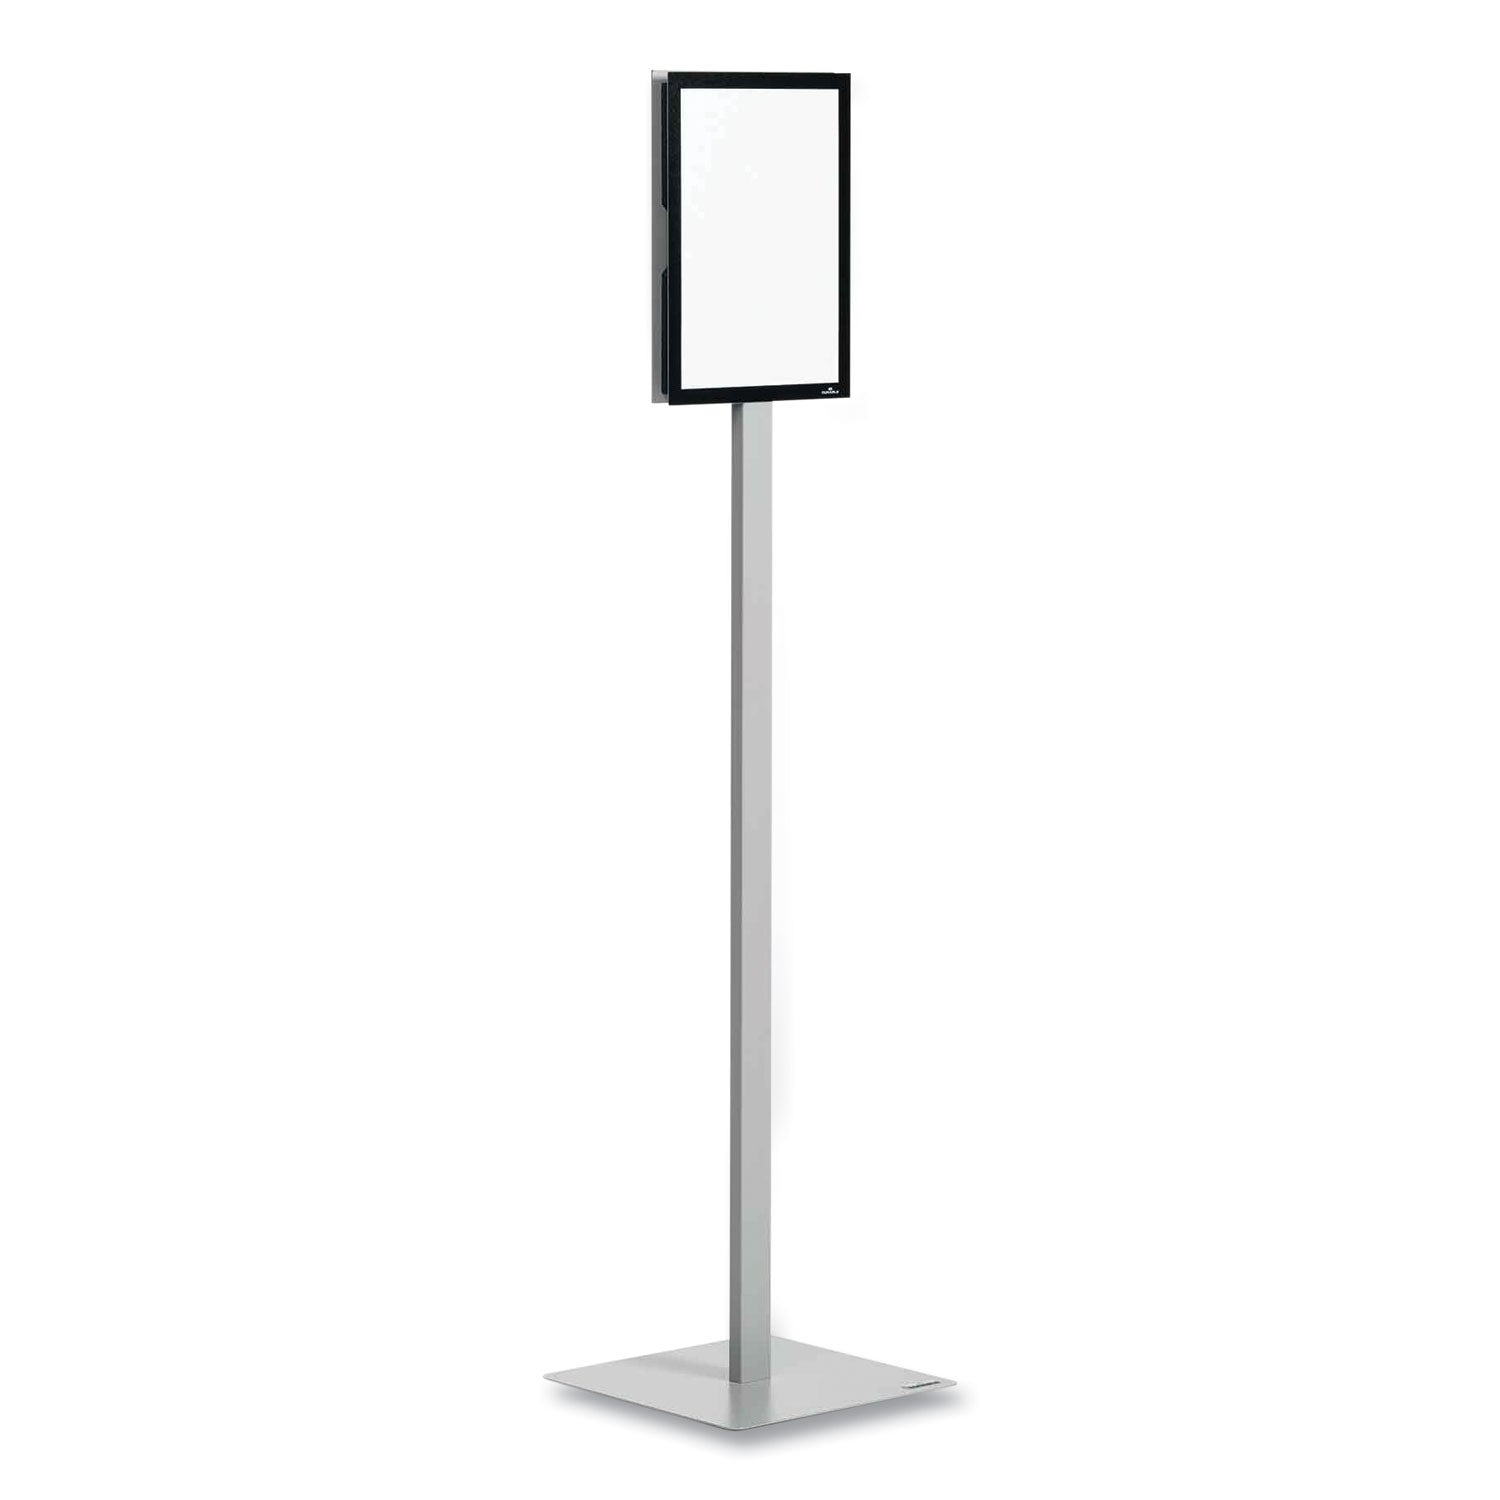 info-stand-basic-floor-stand-5157-tall-black-stand-85-x-11-face_dbl501057 - 1